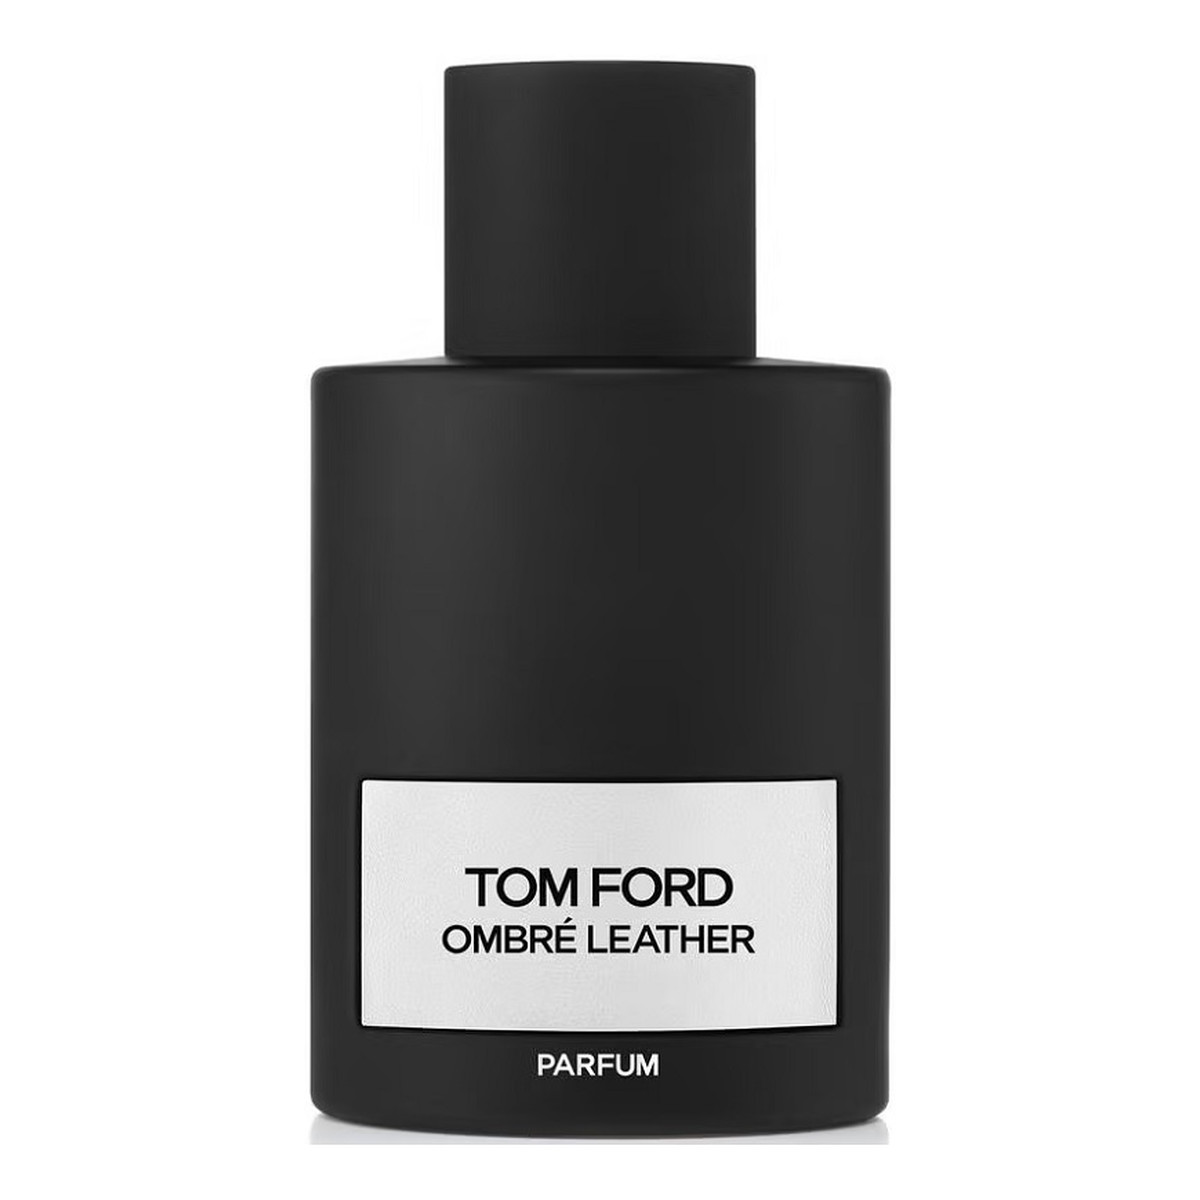 Tom Ford Ombre Leather Perfumy spray 100ml